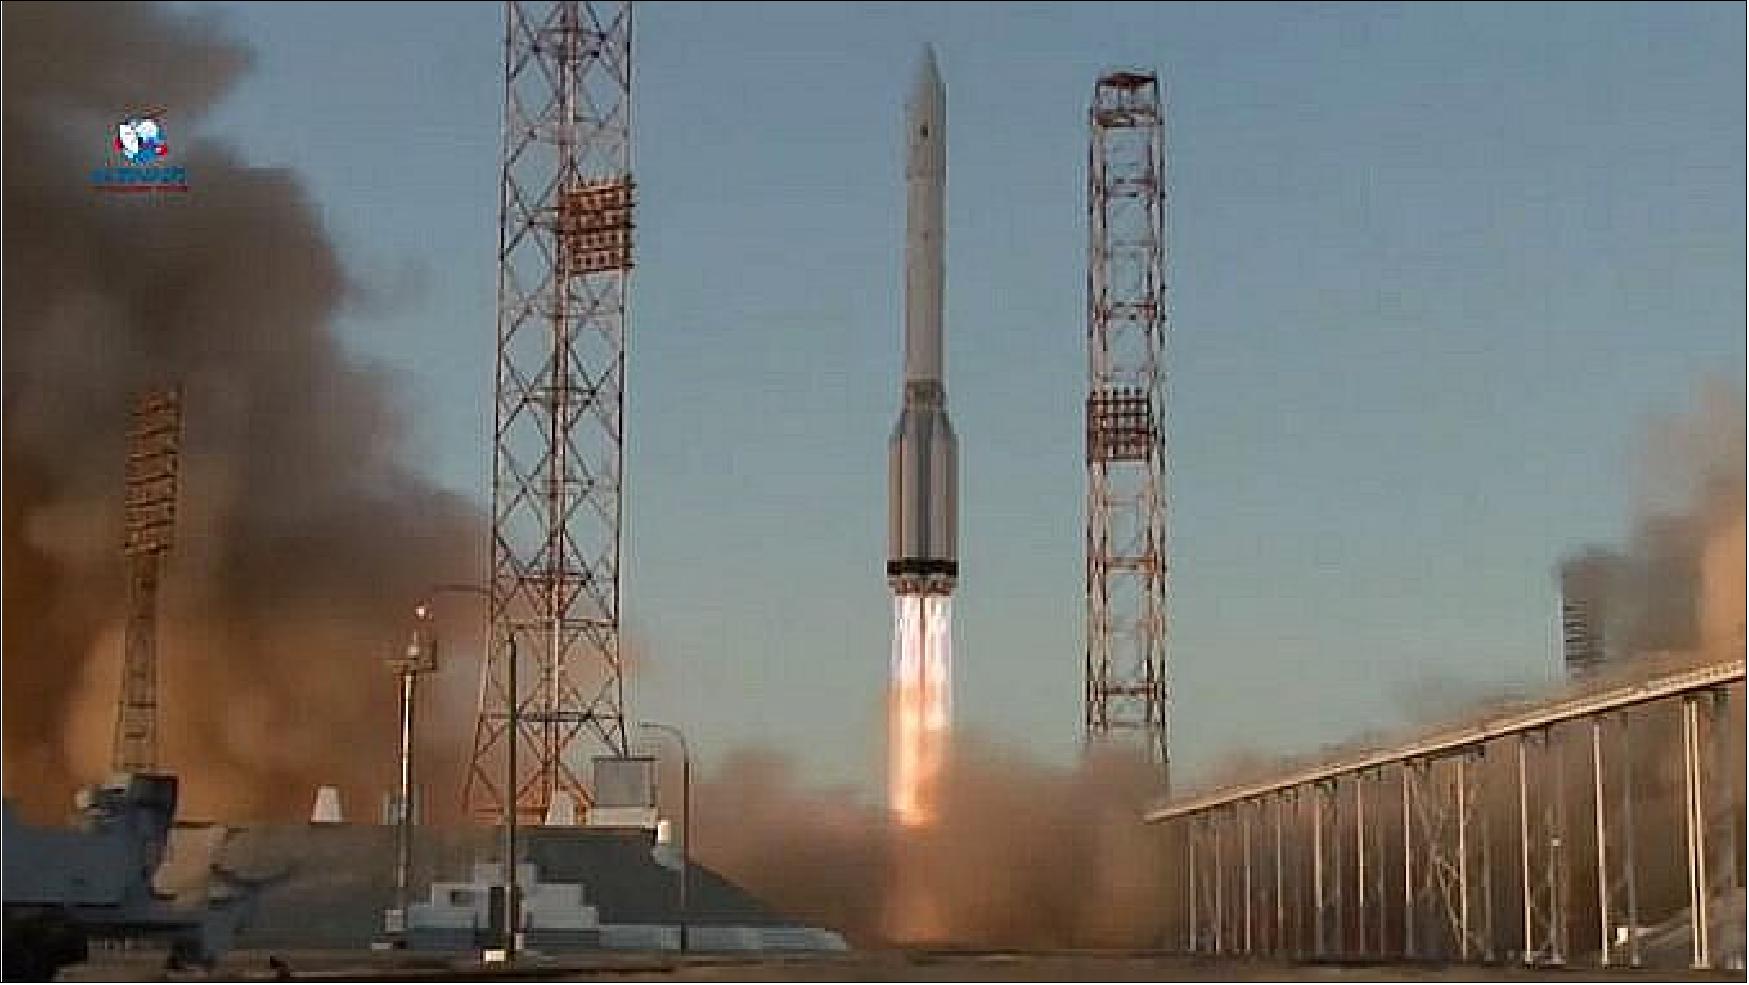 Figure 9: A Proton rocket lifts off from the Baikonur Cosmodrome July 21 carrying the Nauka module to the ISS. The Proton-M for this mission flew in its three stage-to-orbit configuration. (image credit: Roscosmos)